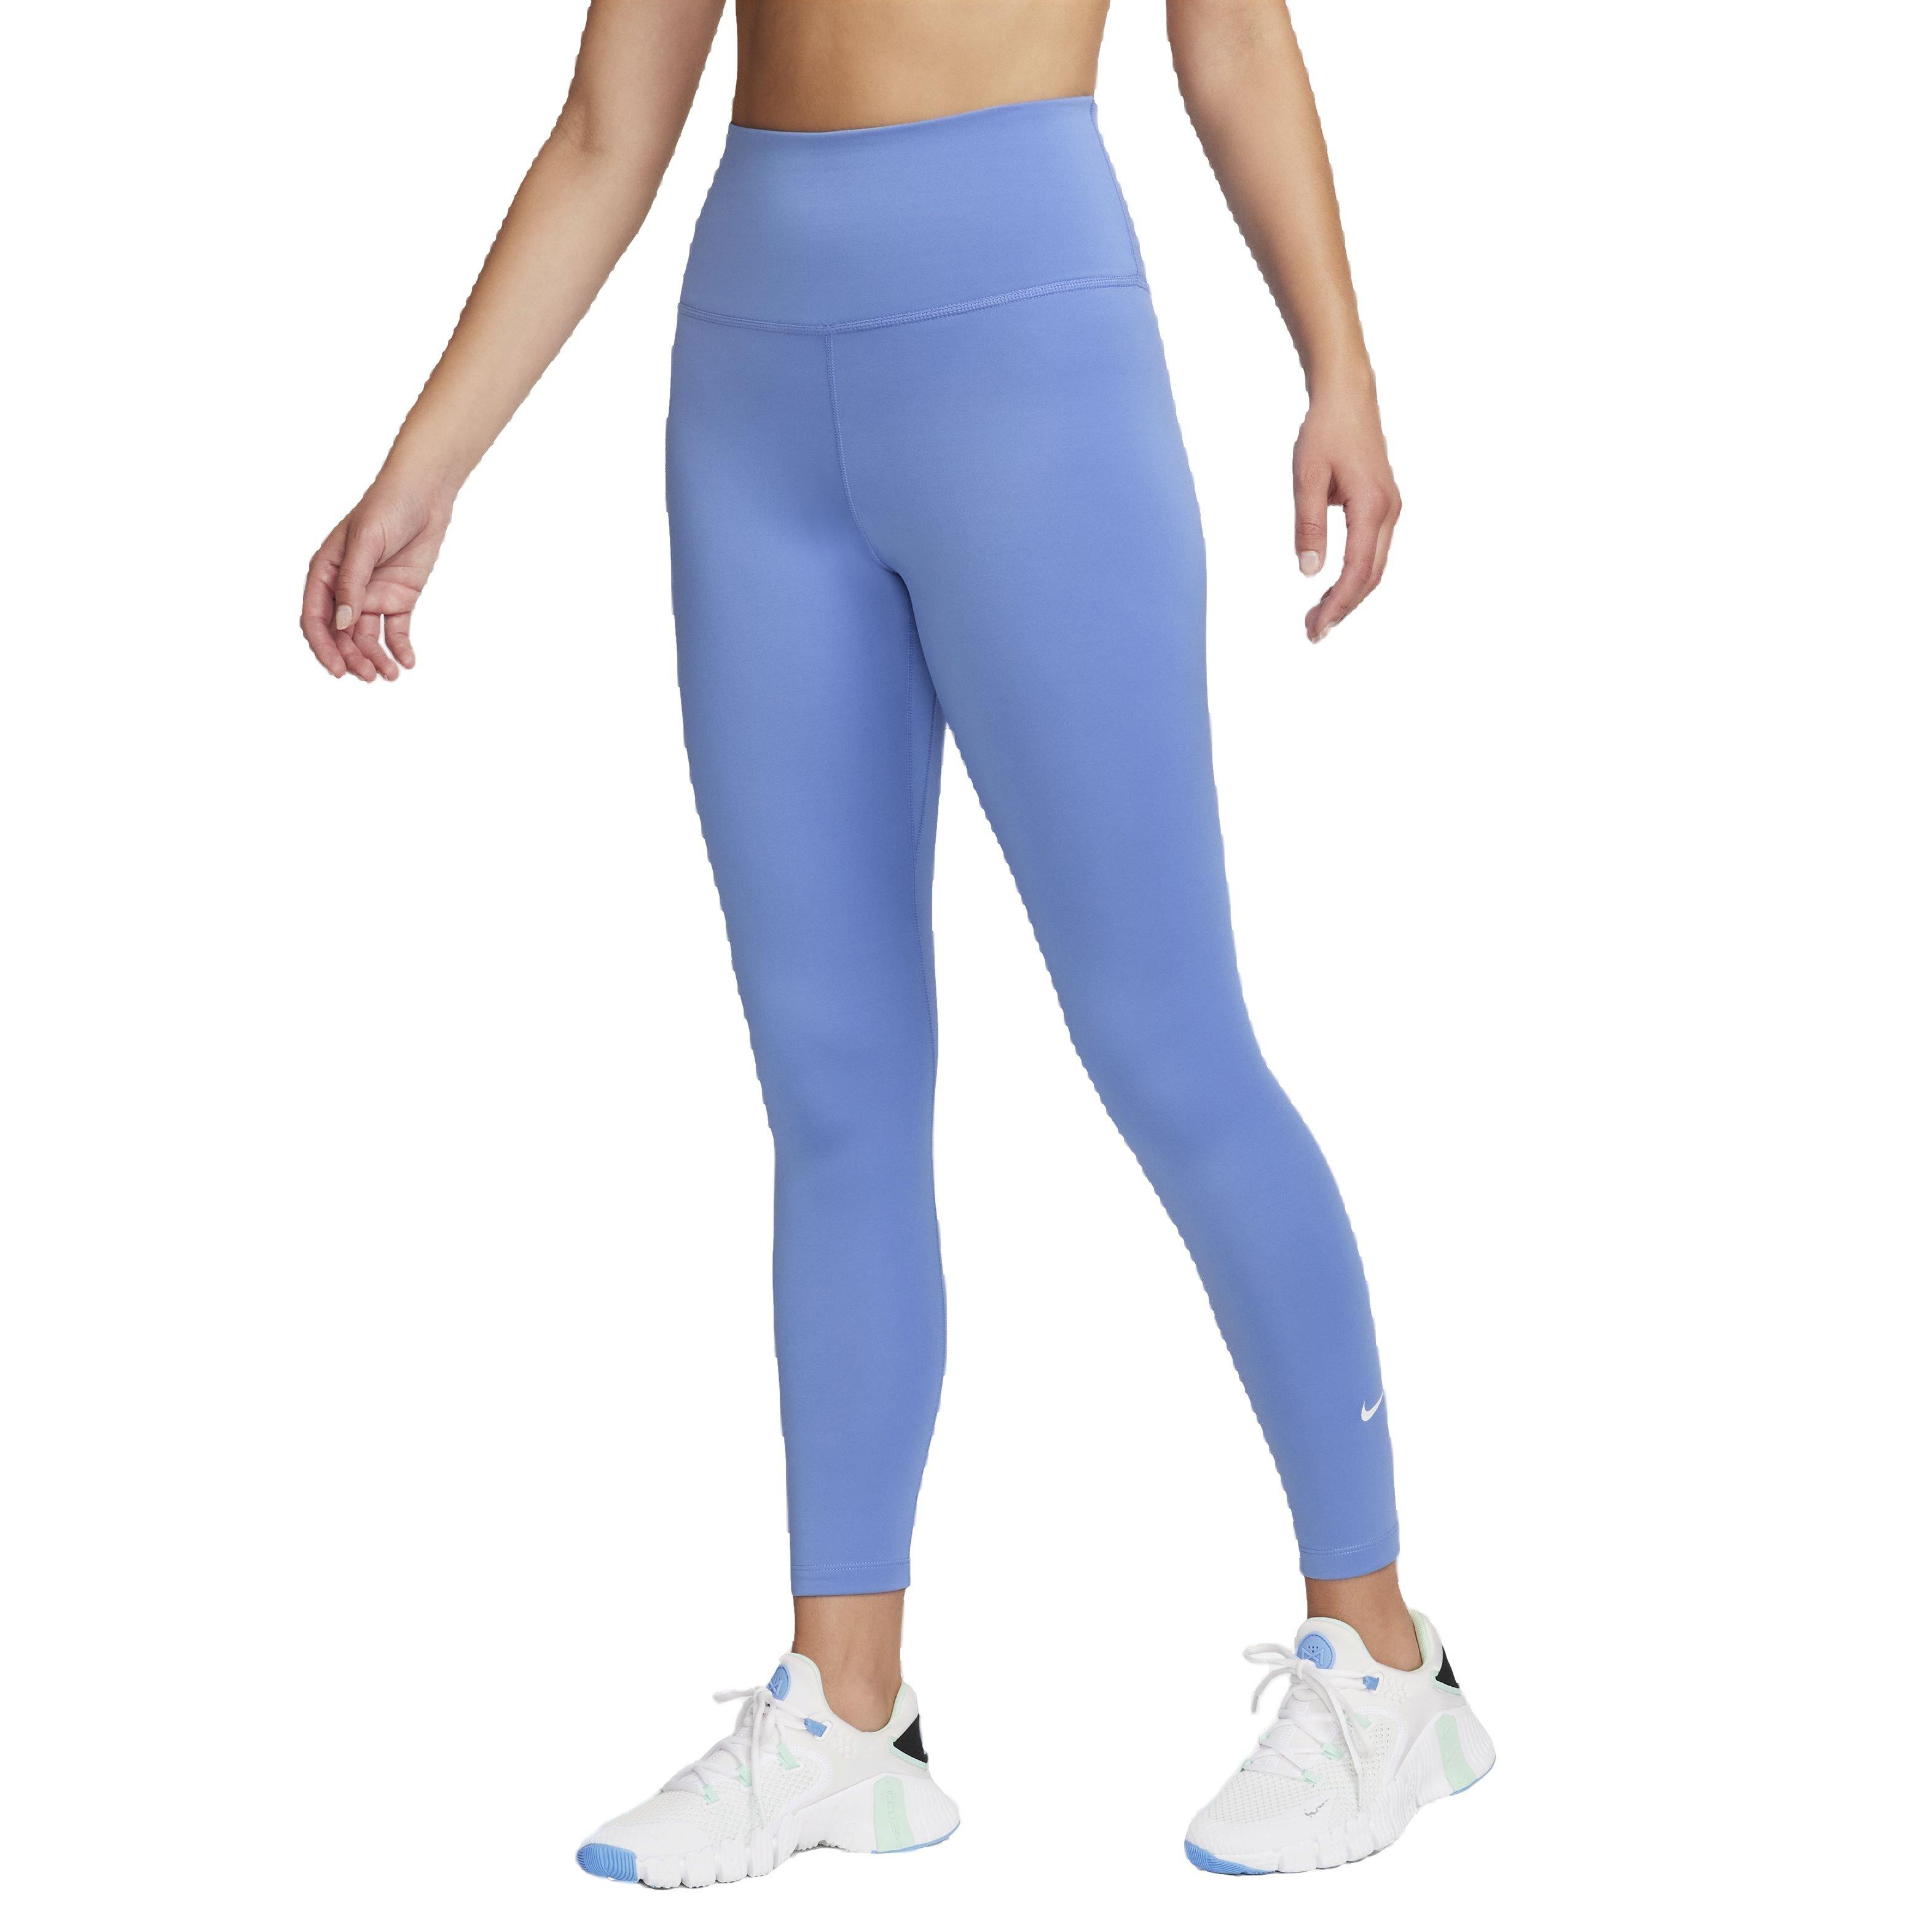 Nike One Women's Therma-FIT High-Waisted 7/8 Leggings